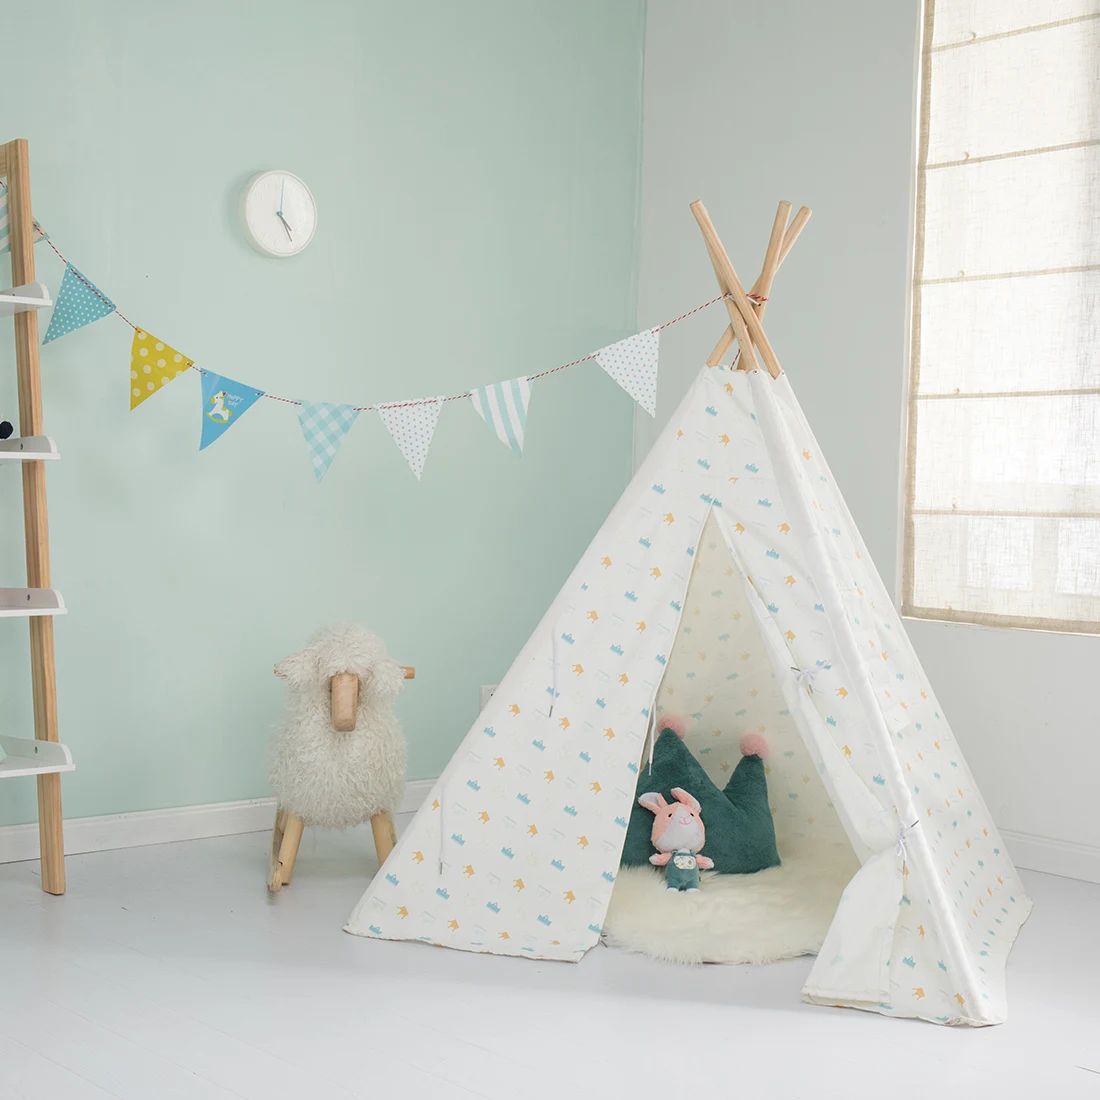 
Custom Foldable Girls Teepee House Toy Kids Children Indoor Baby Play Tent with window  (1600173570466)